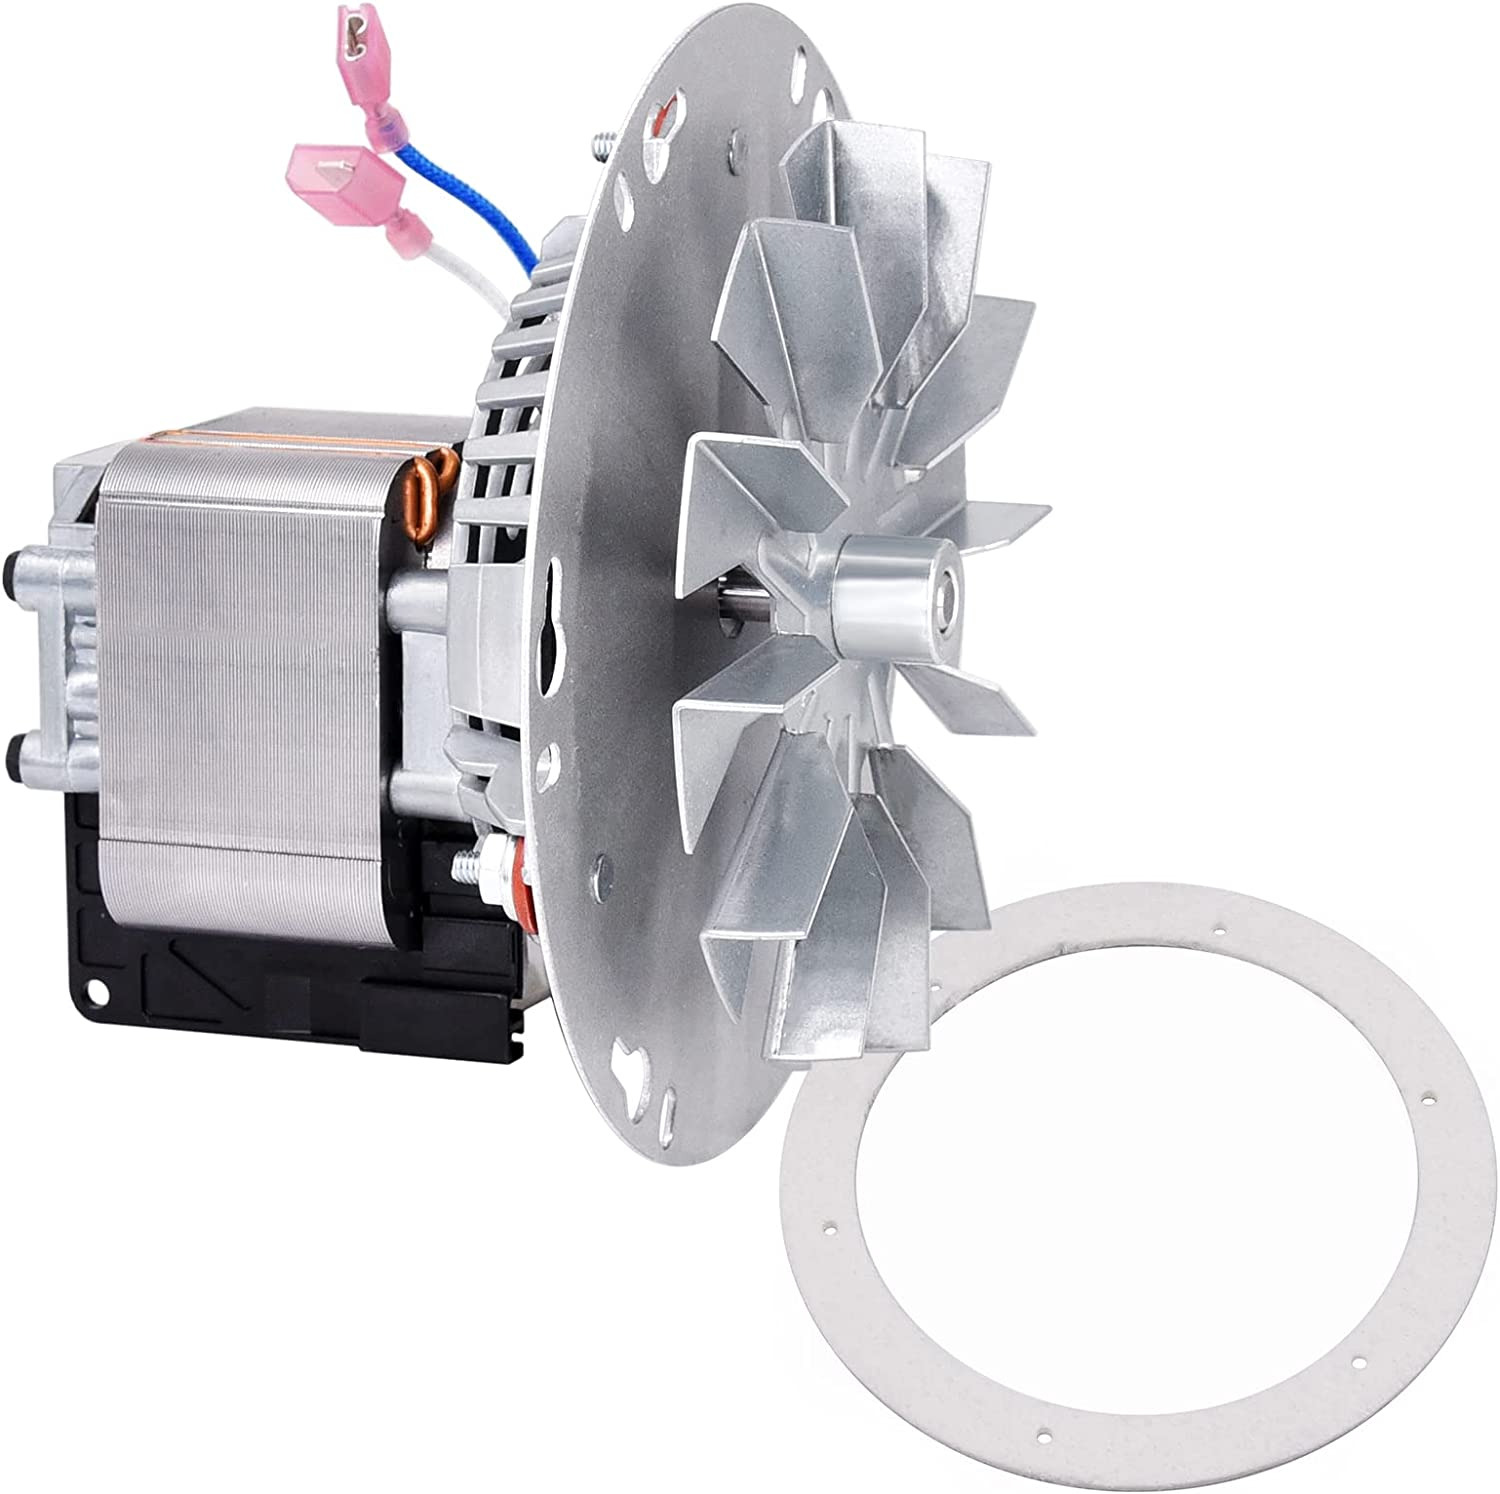 Criditpid Replacement A-E-027 Combustion Blower Motor for Breckwell Pellet Stove